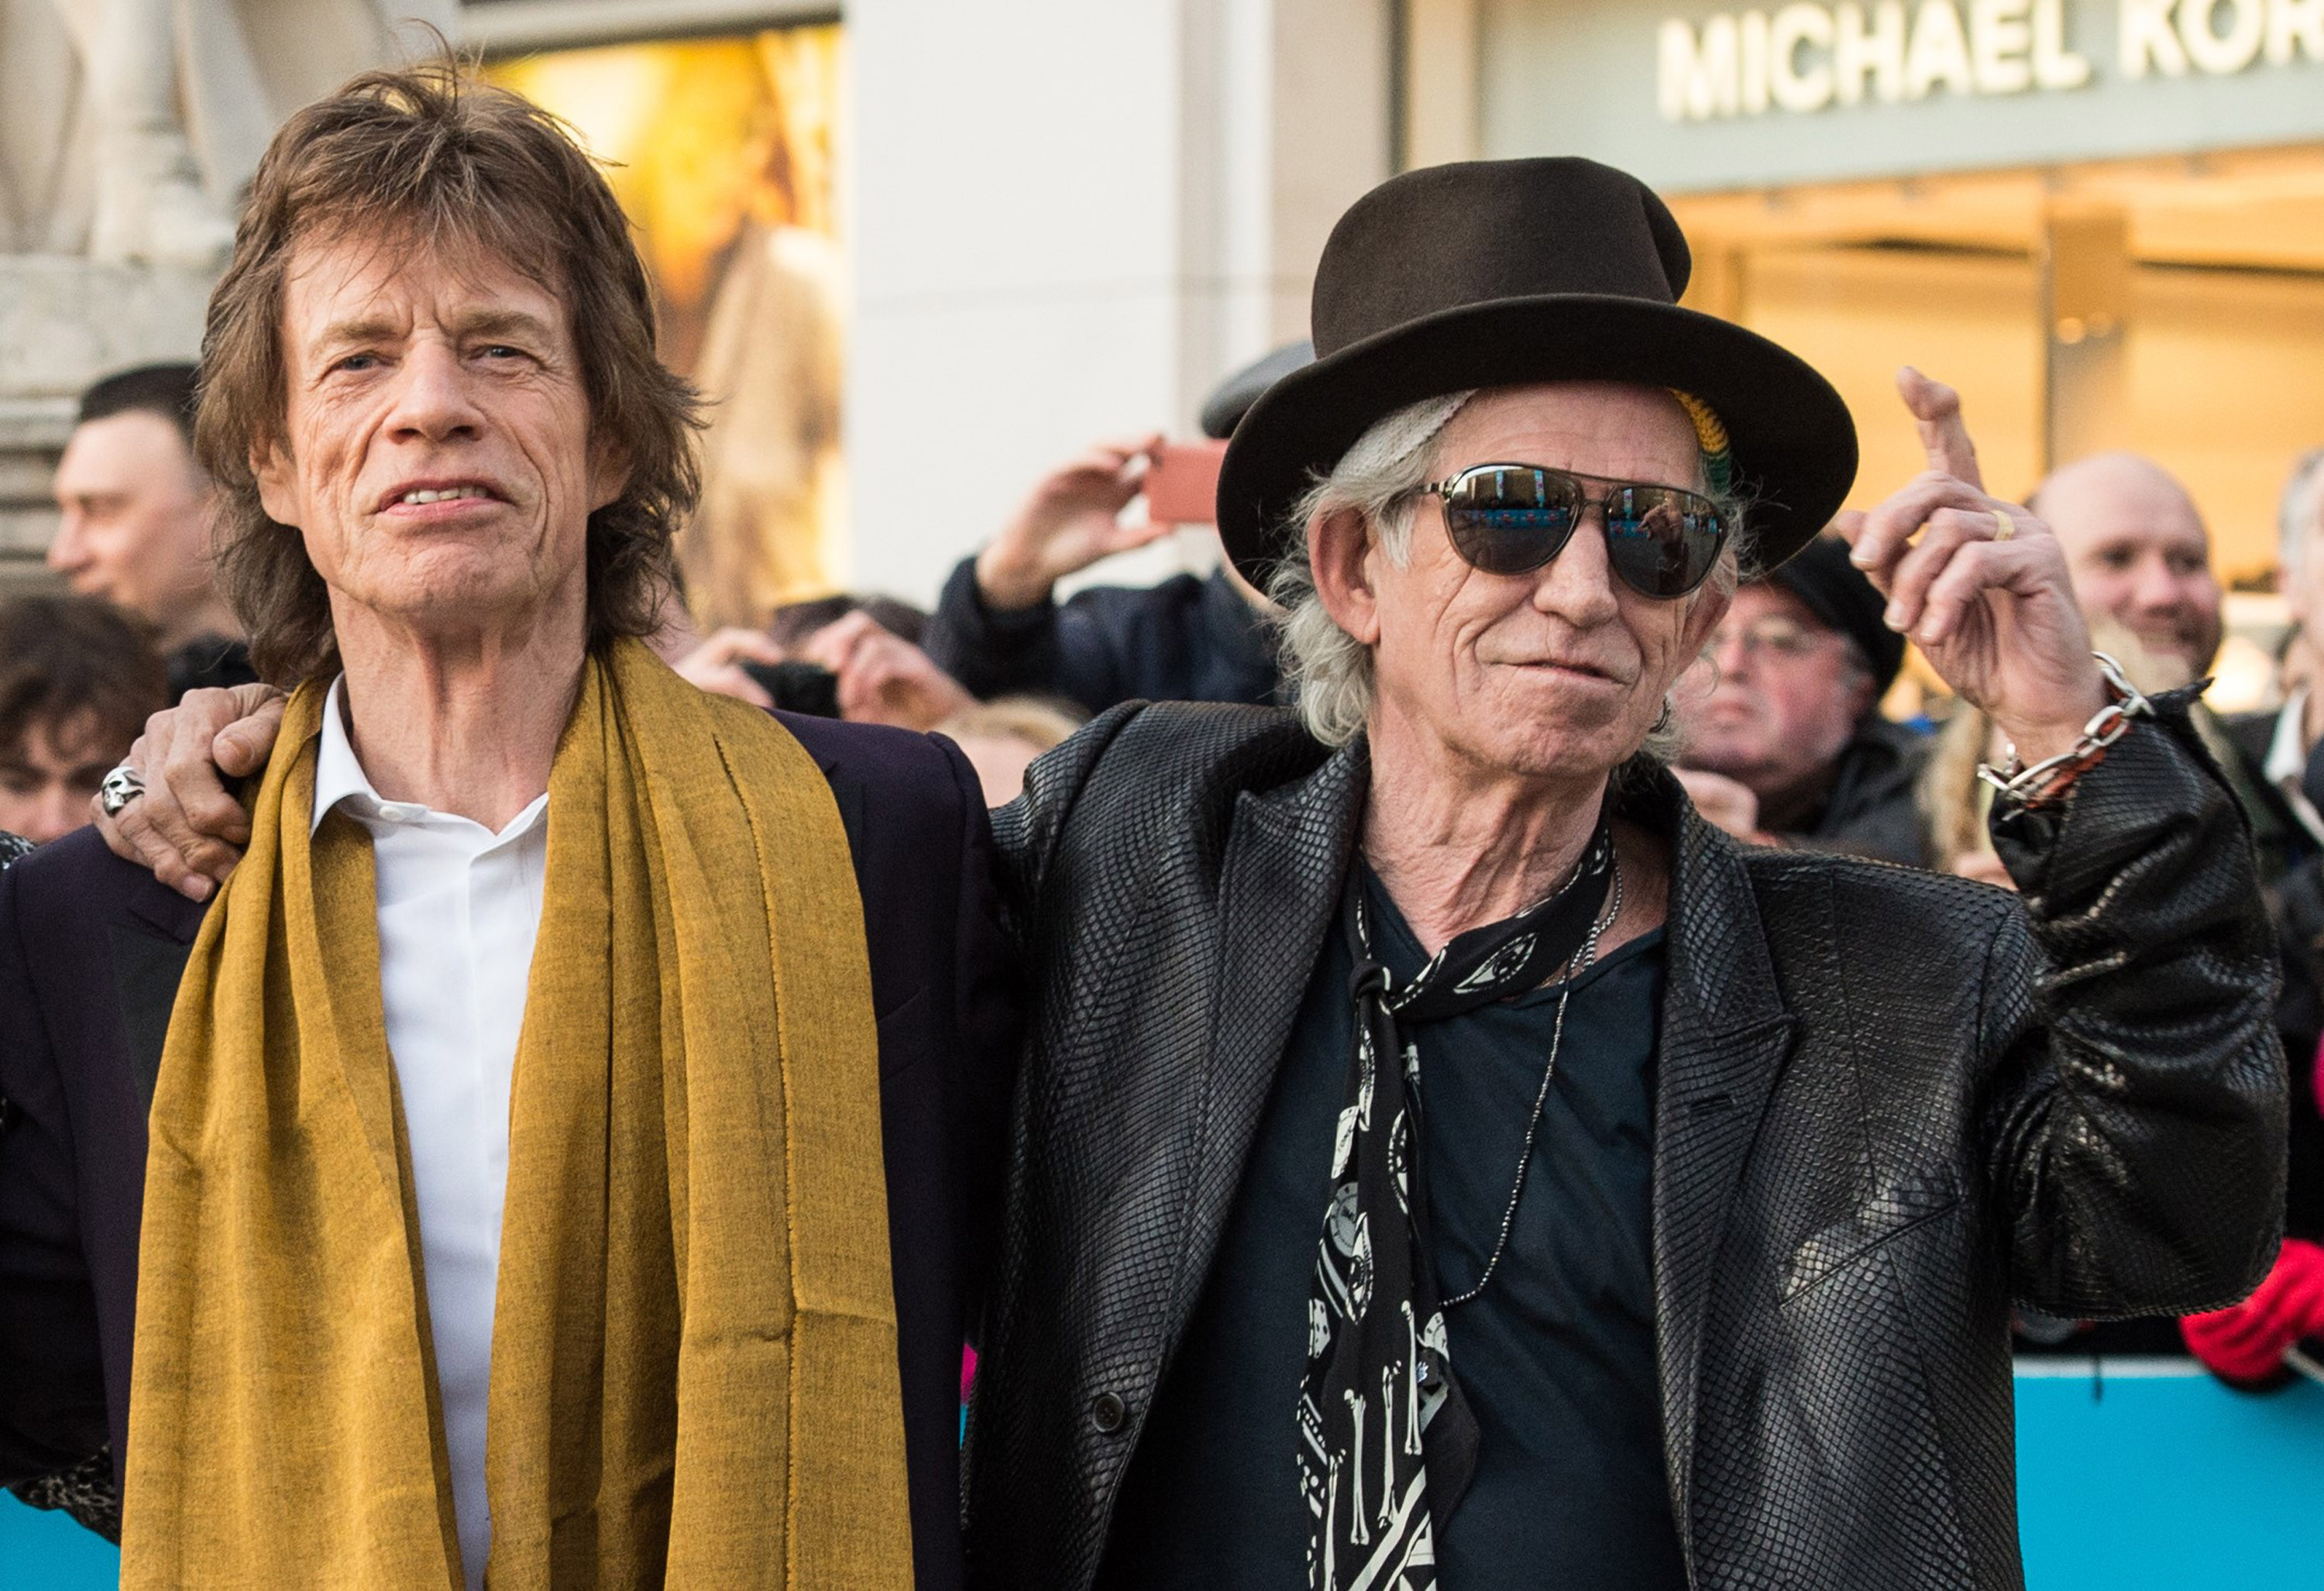 Mick Jagger and Keith Richards attend a private view of 'The Rolling Stones: Exhibitionism' gallery in London, England